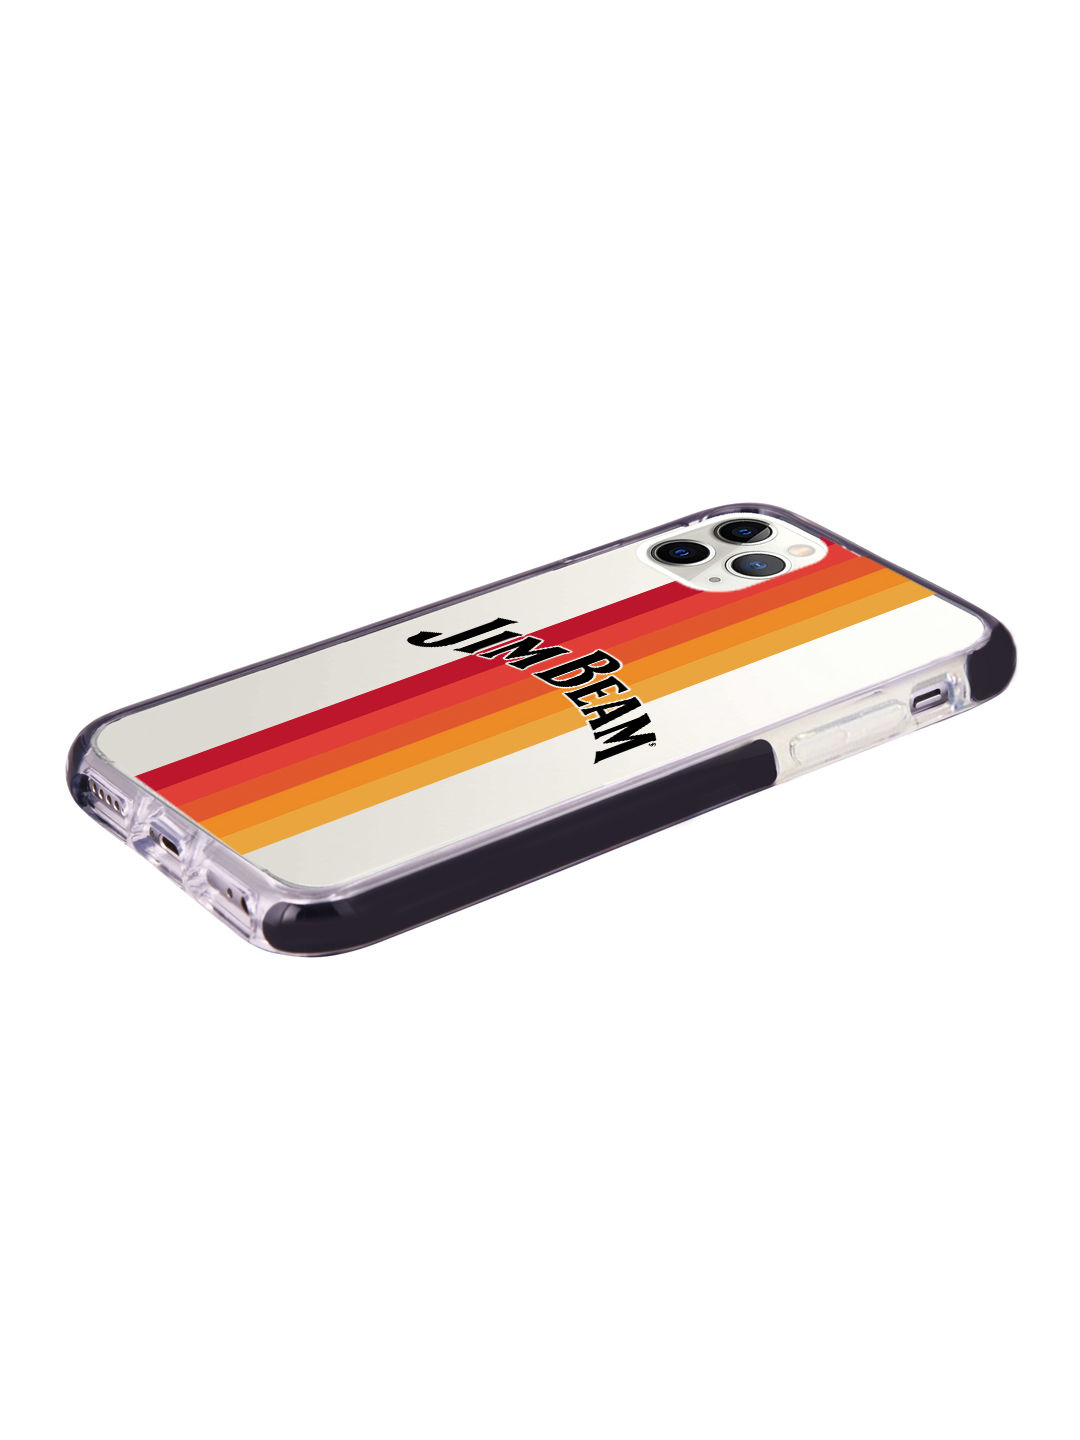 Jim Beam Sun rays Stripes - Shield Case for iPhone 11 Pro